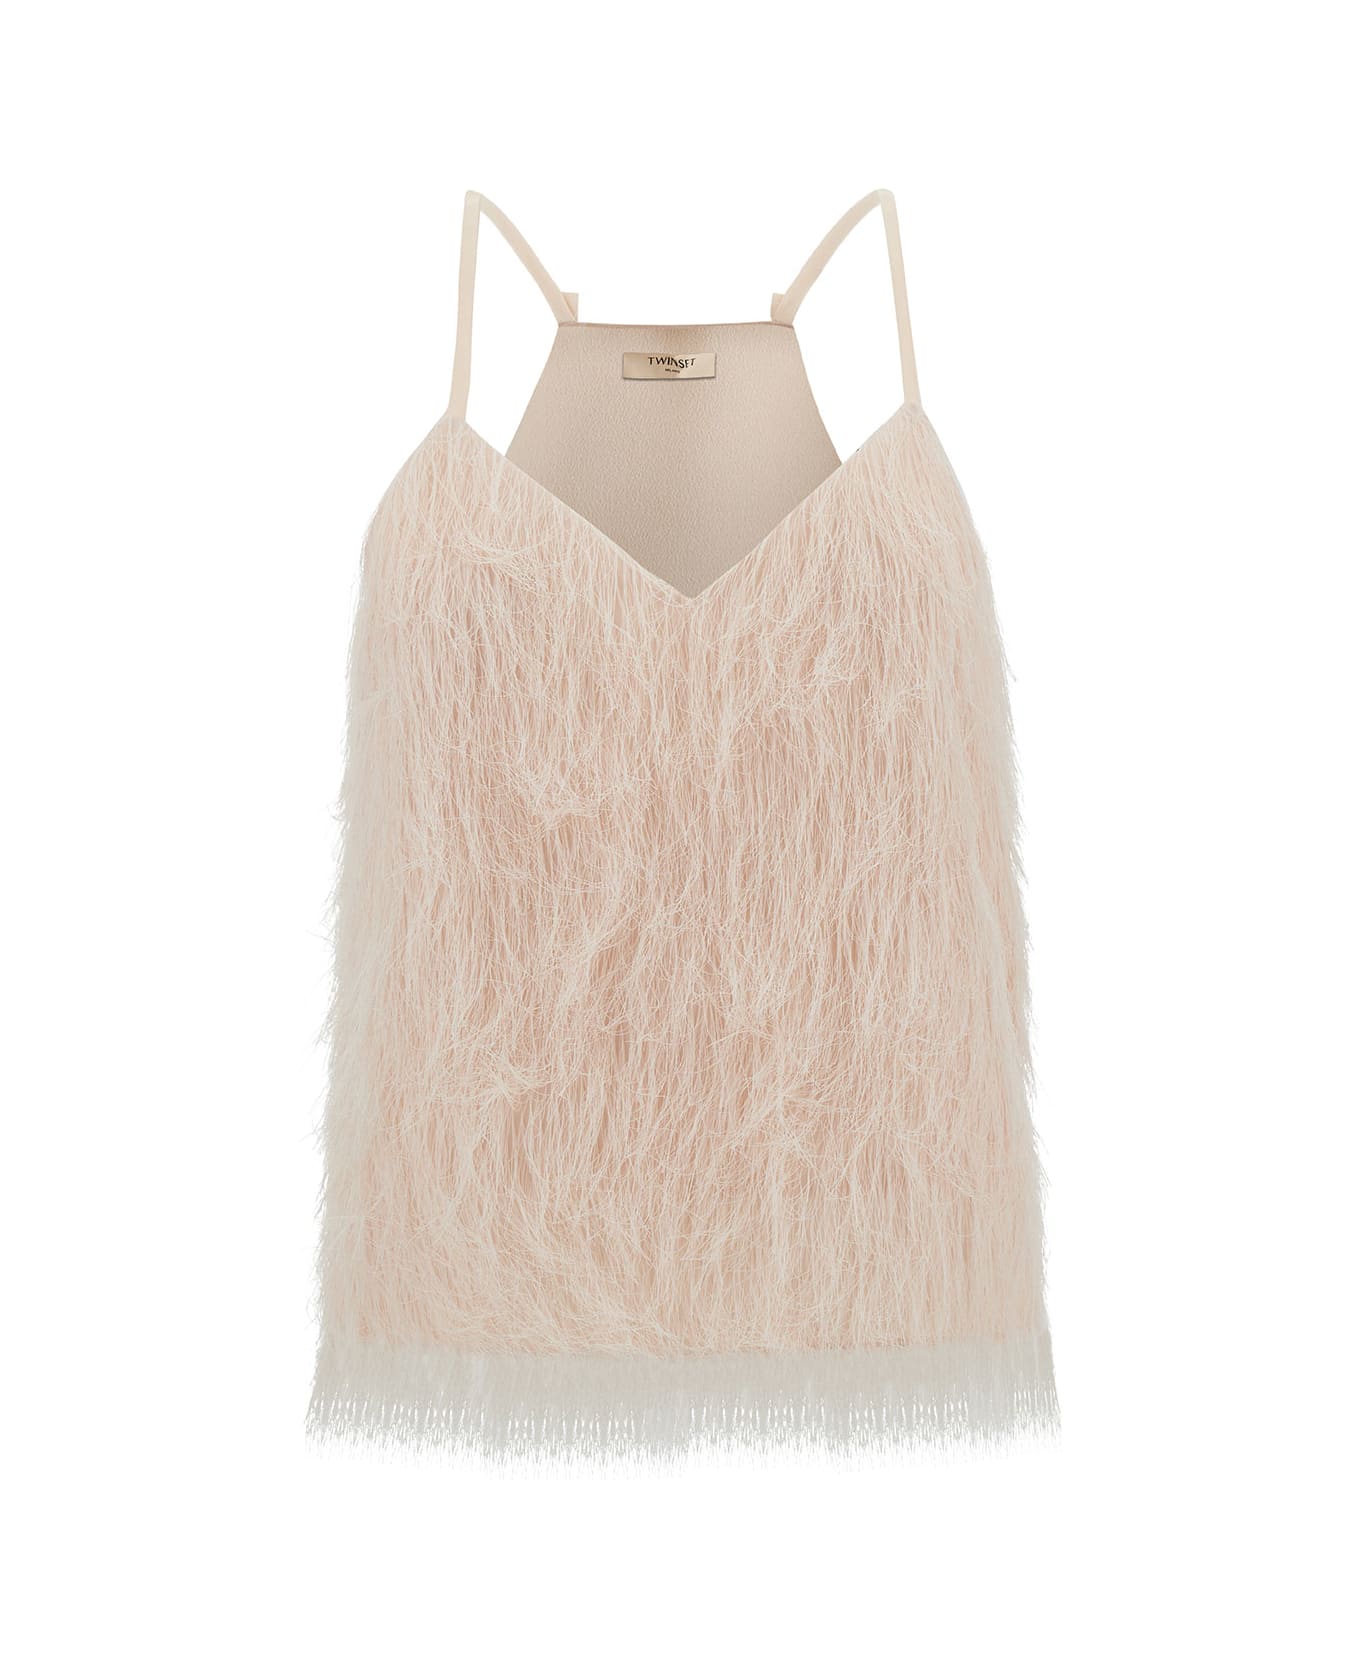 TwinSet Light Pink Top With All-over Feathers In Tech Fabric Woman - Pink キャミソール